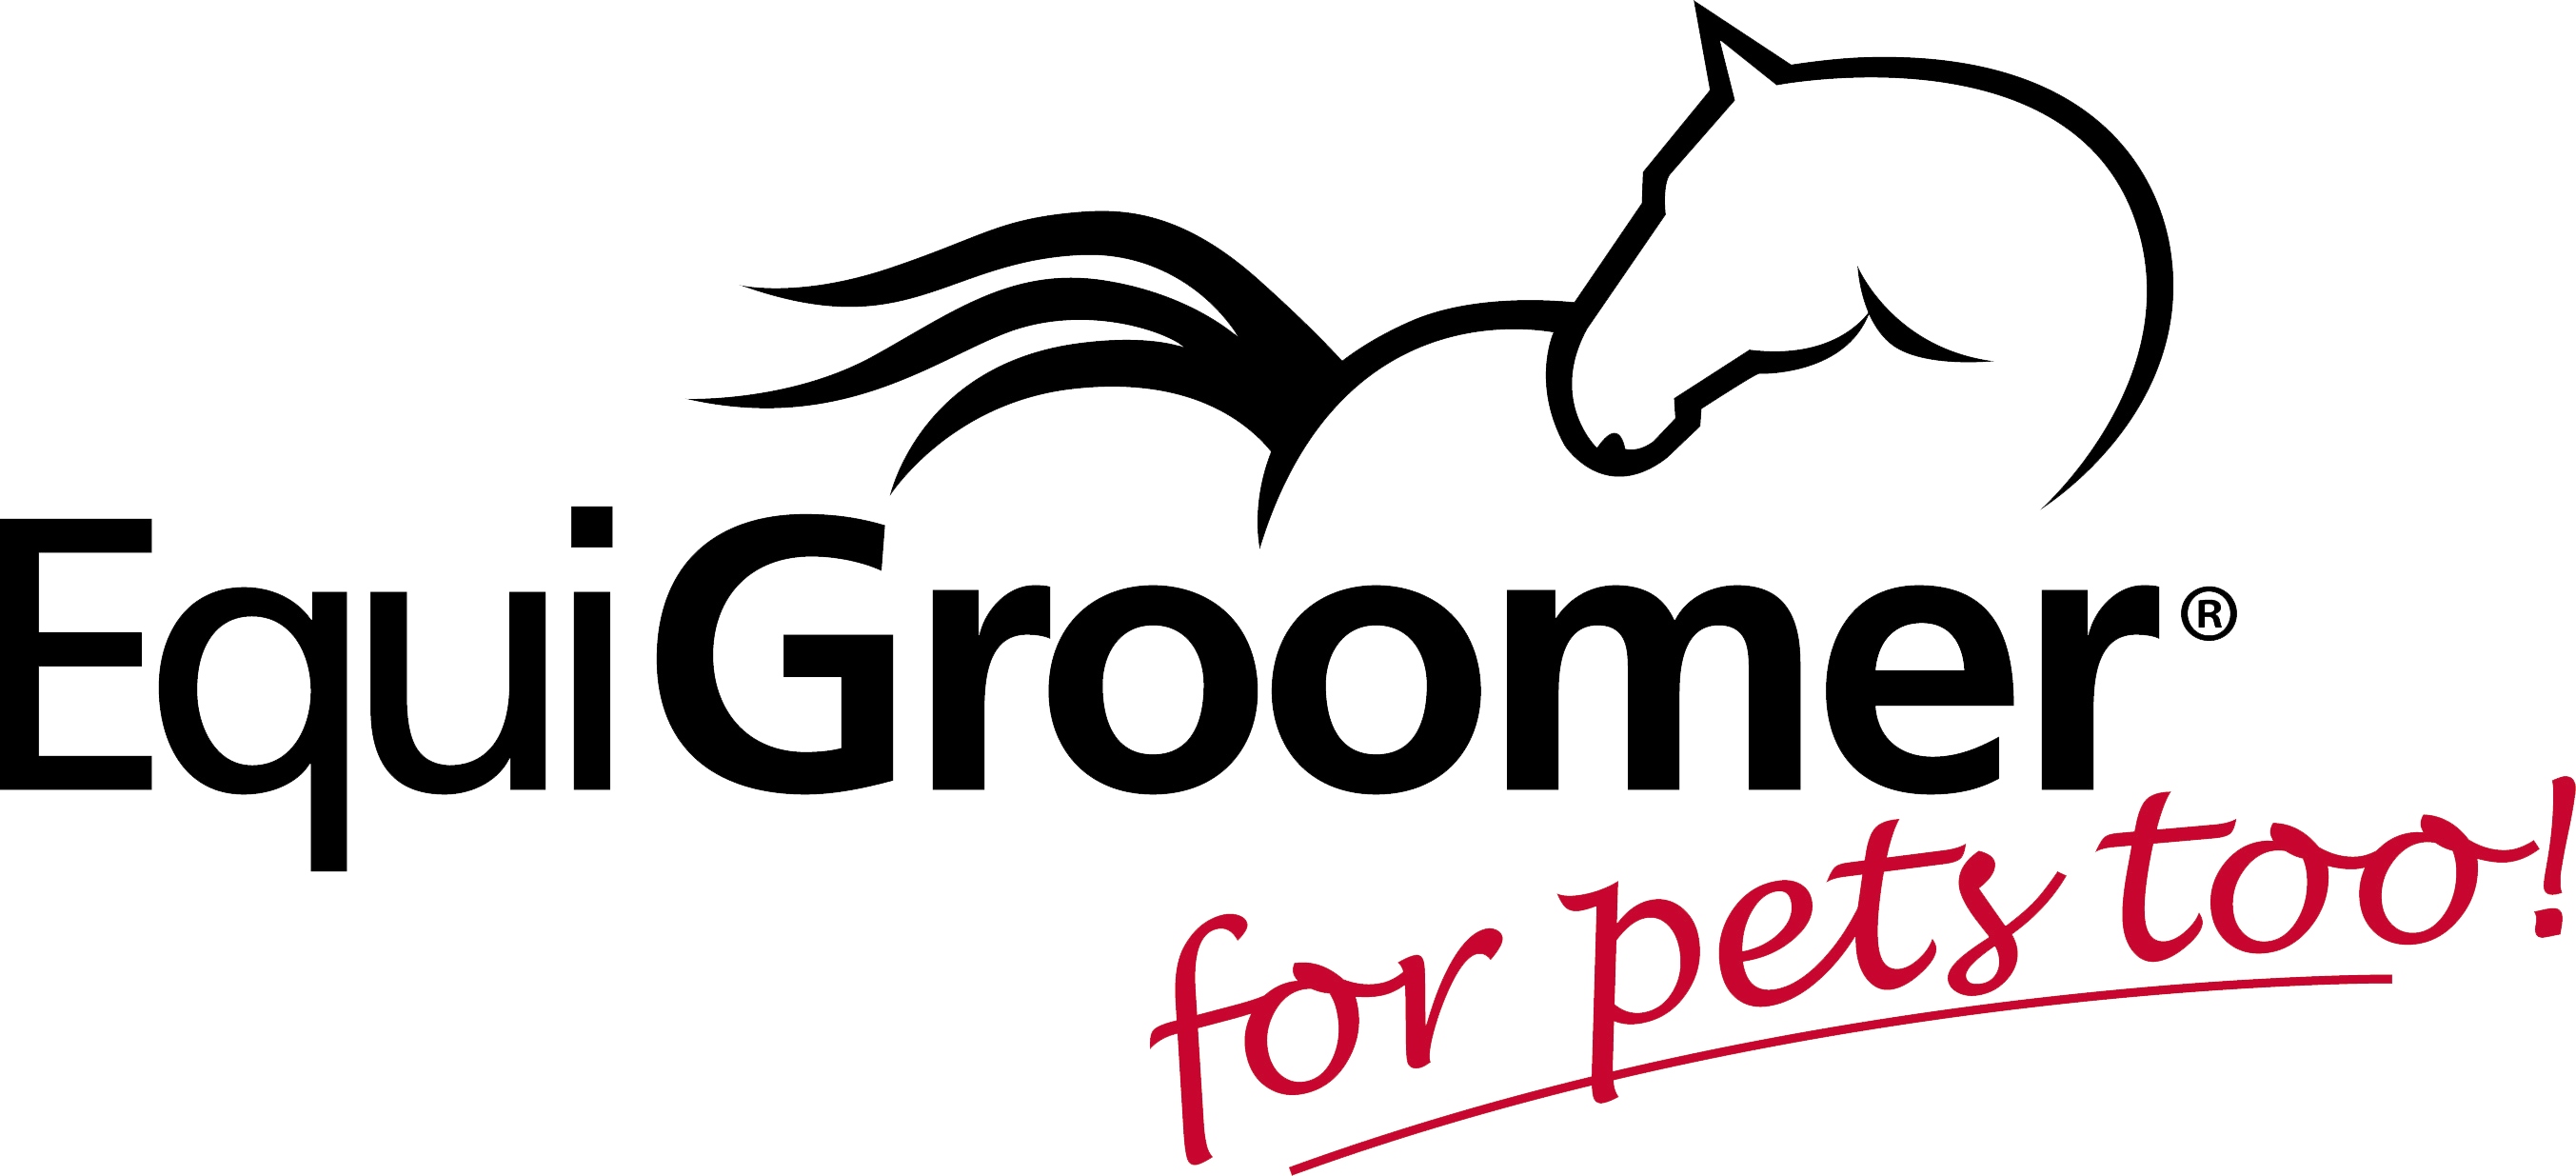 cropped-cropped-EquiGroomerLogo_pets.png